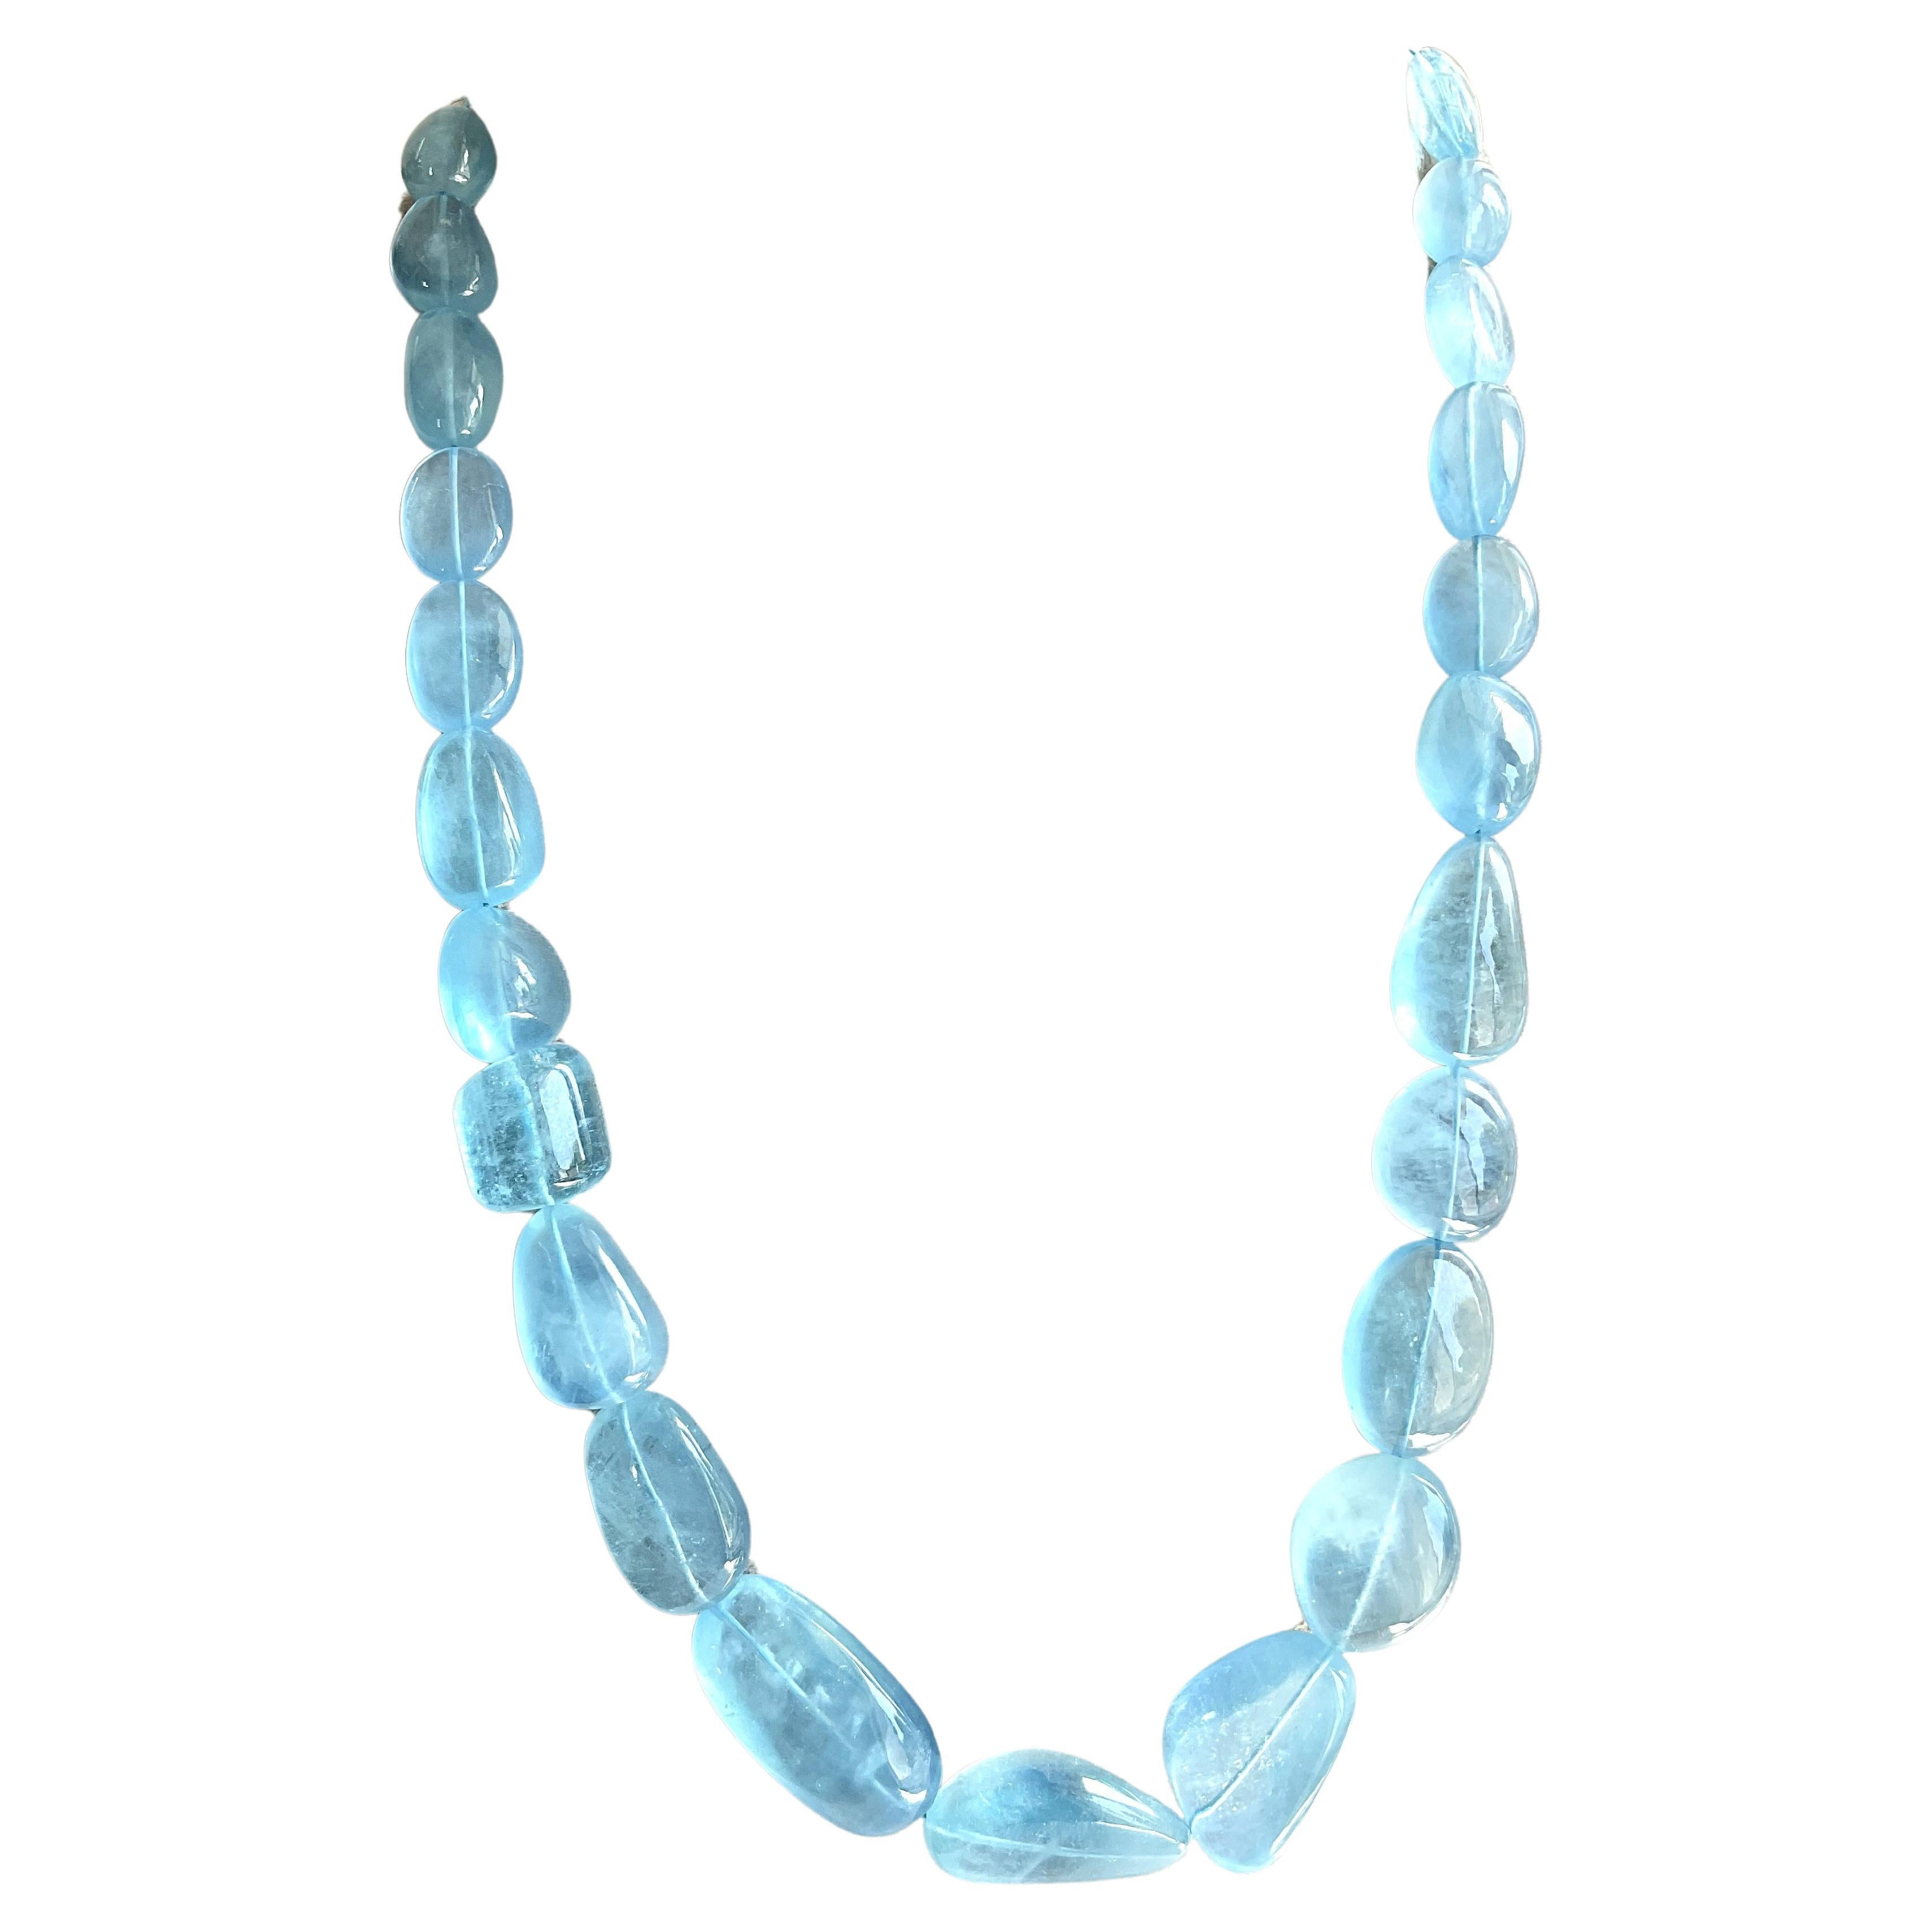 689.65 cts Aquamarine necklace smooth 1 Strand Necklace Top Quality Natural Gem  For Sale